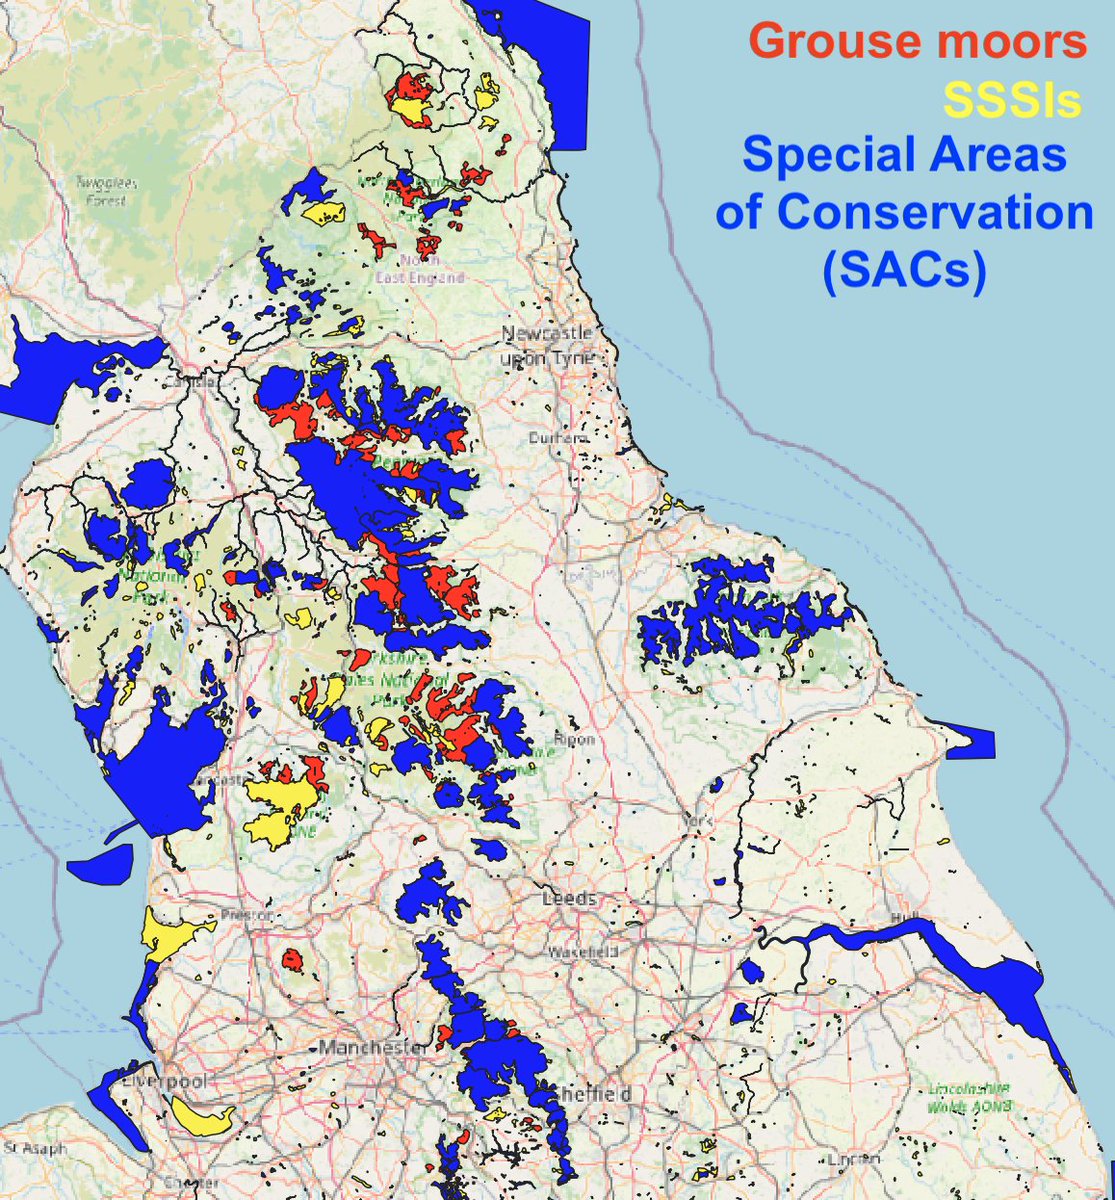 And here’s where grouse moors are covered by SSSIs, Special Areas of Conservation (SACs) and Special Protection Areas (SPAs). Most are covered by all three nature designations. Areas in red show the grouse moors outside them.(3/10)